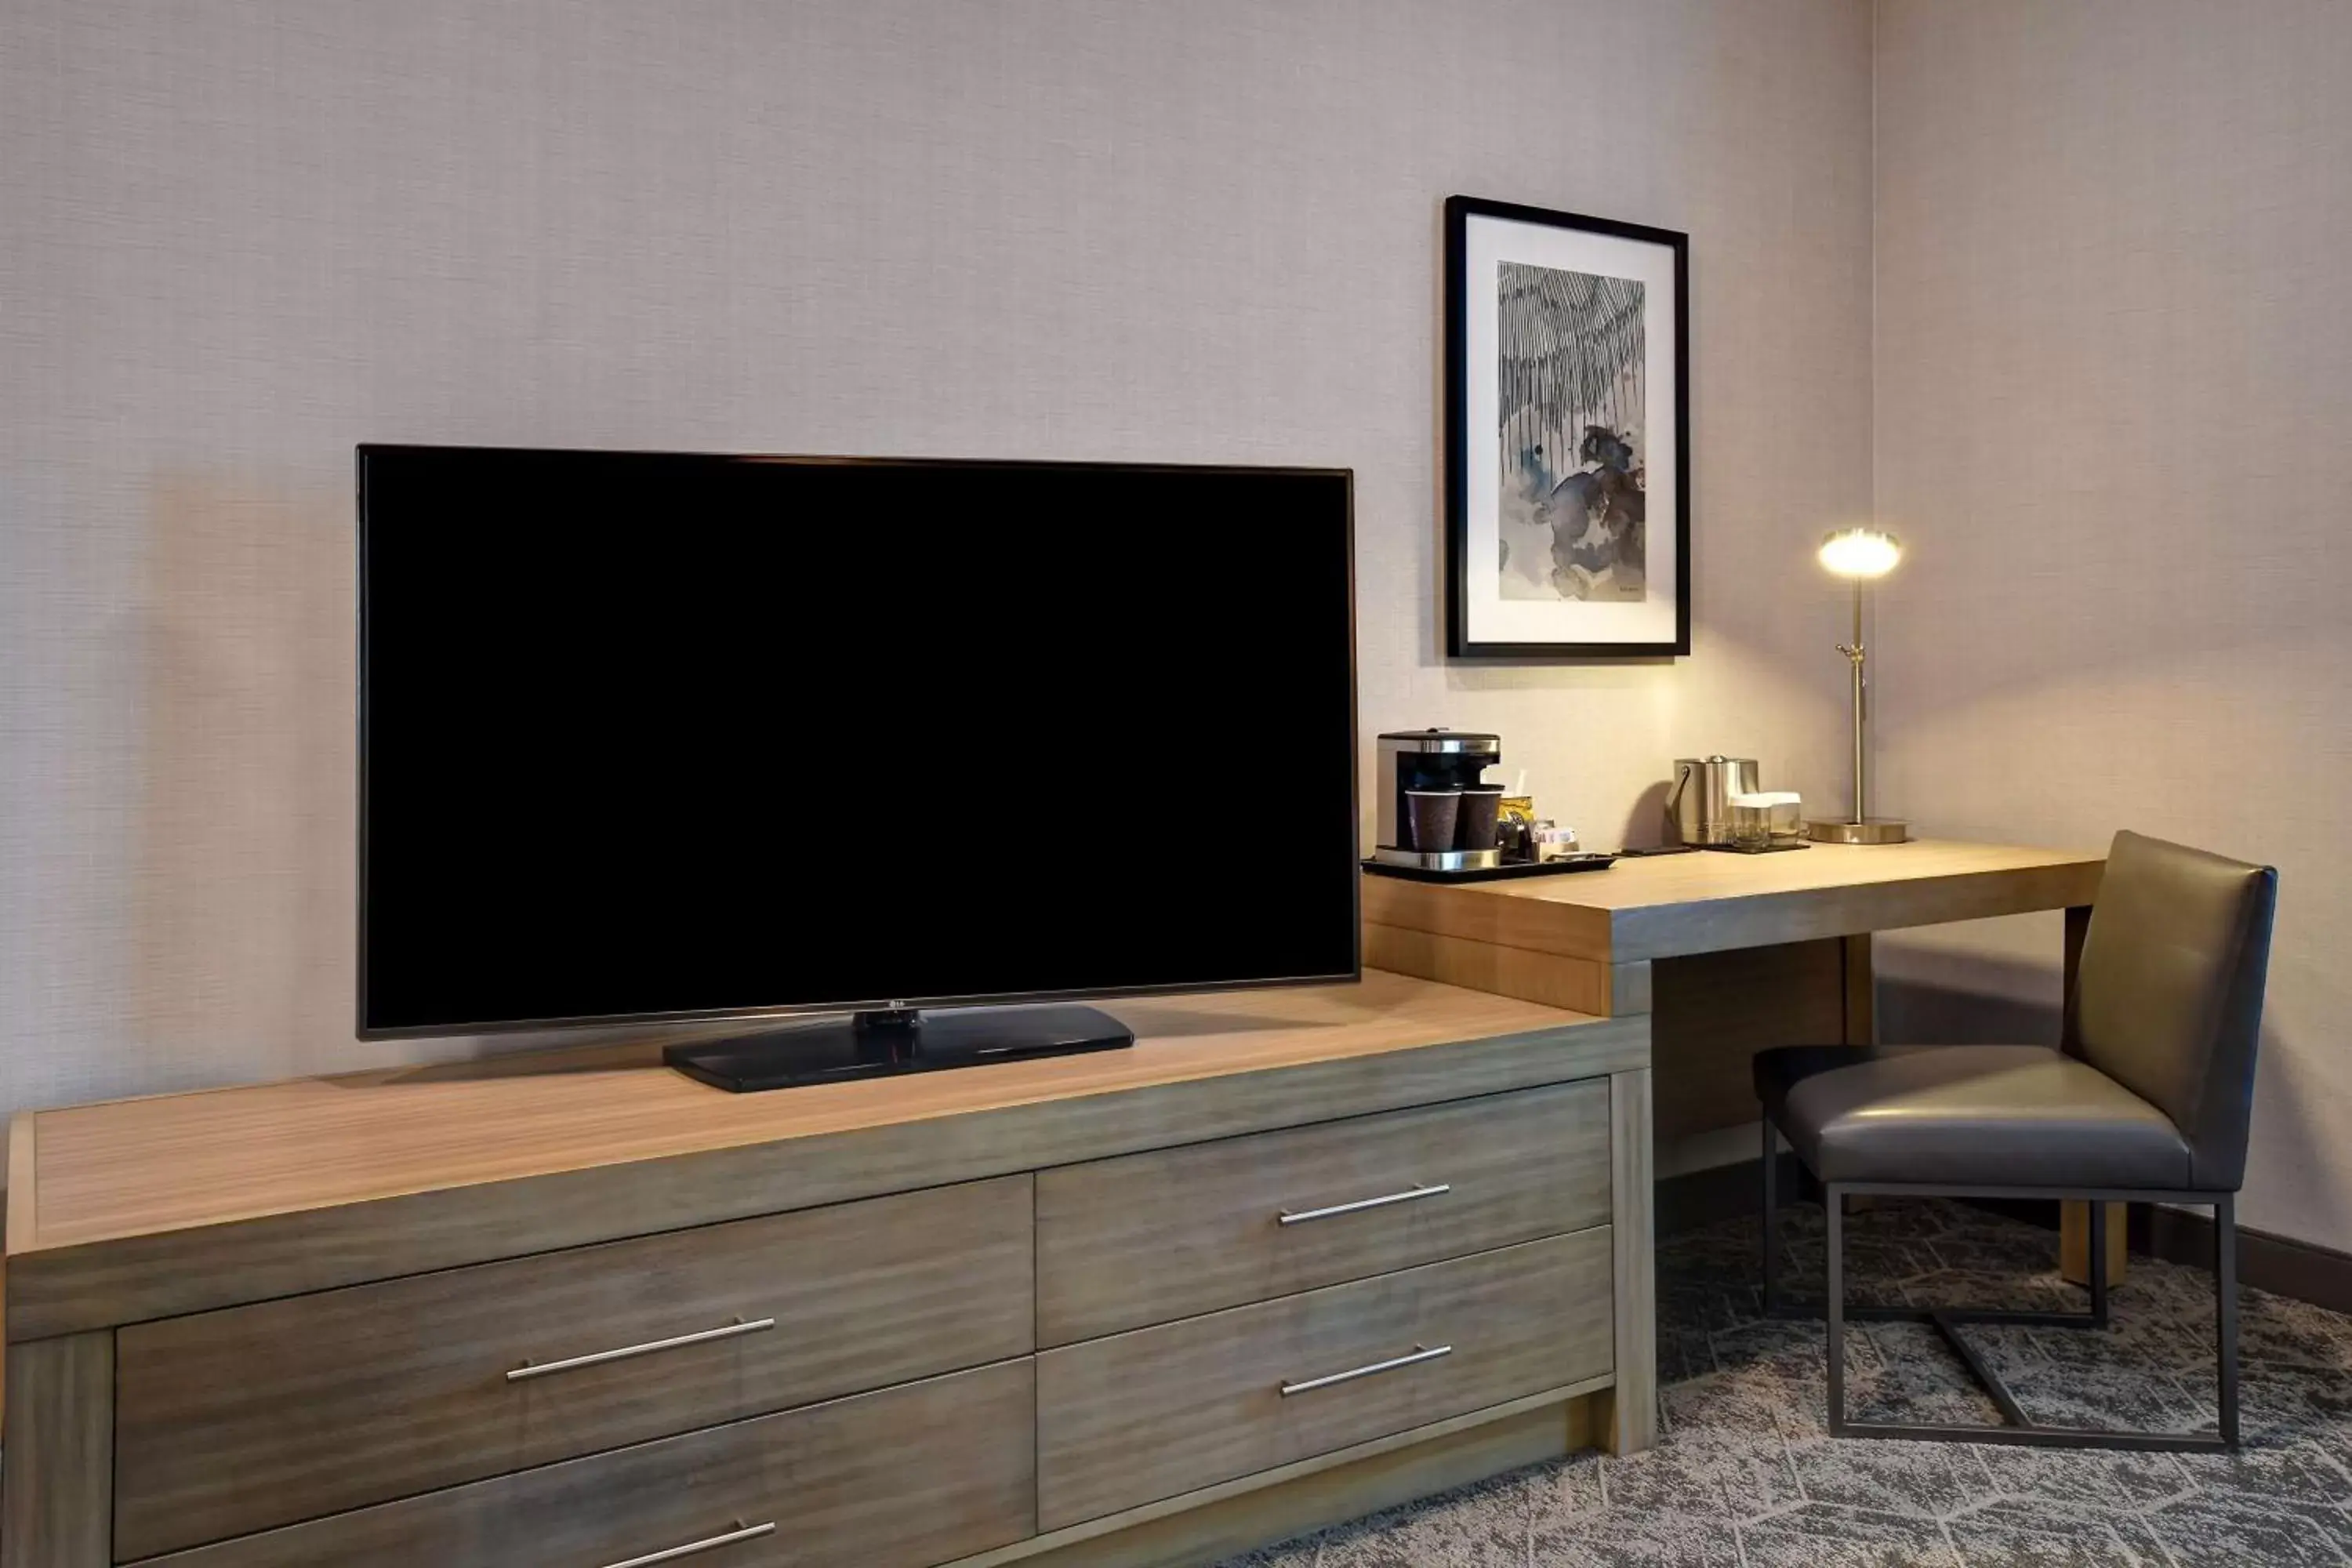 Bedroom, TV/Entertainment Center in DoubleTree by Hilton St. Louis Airport, MO